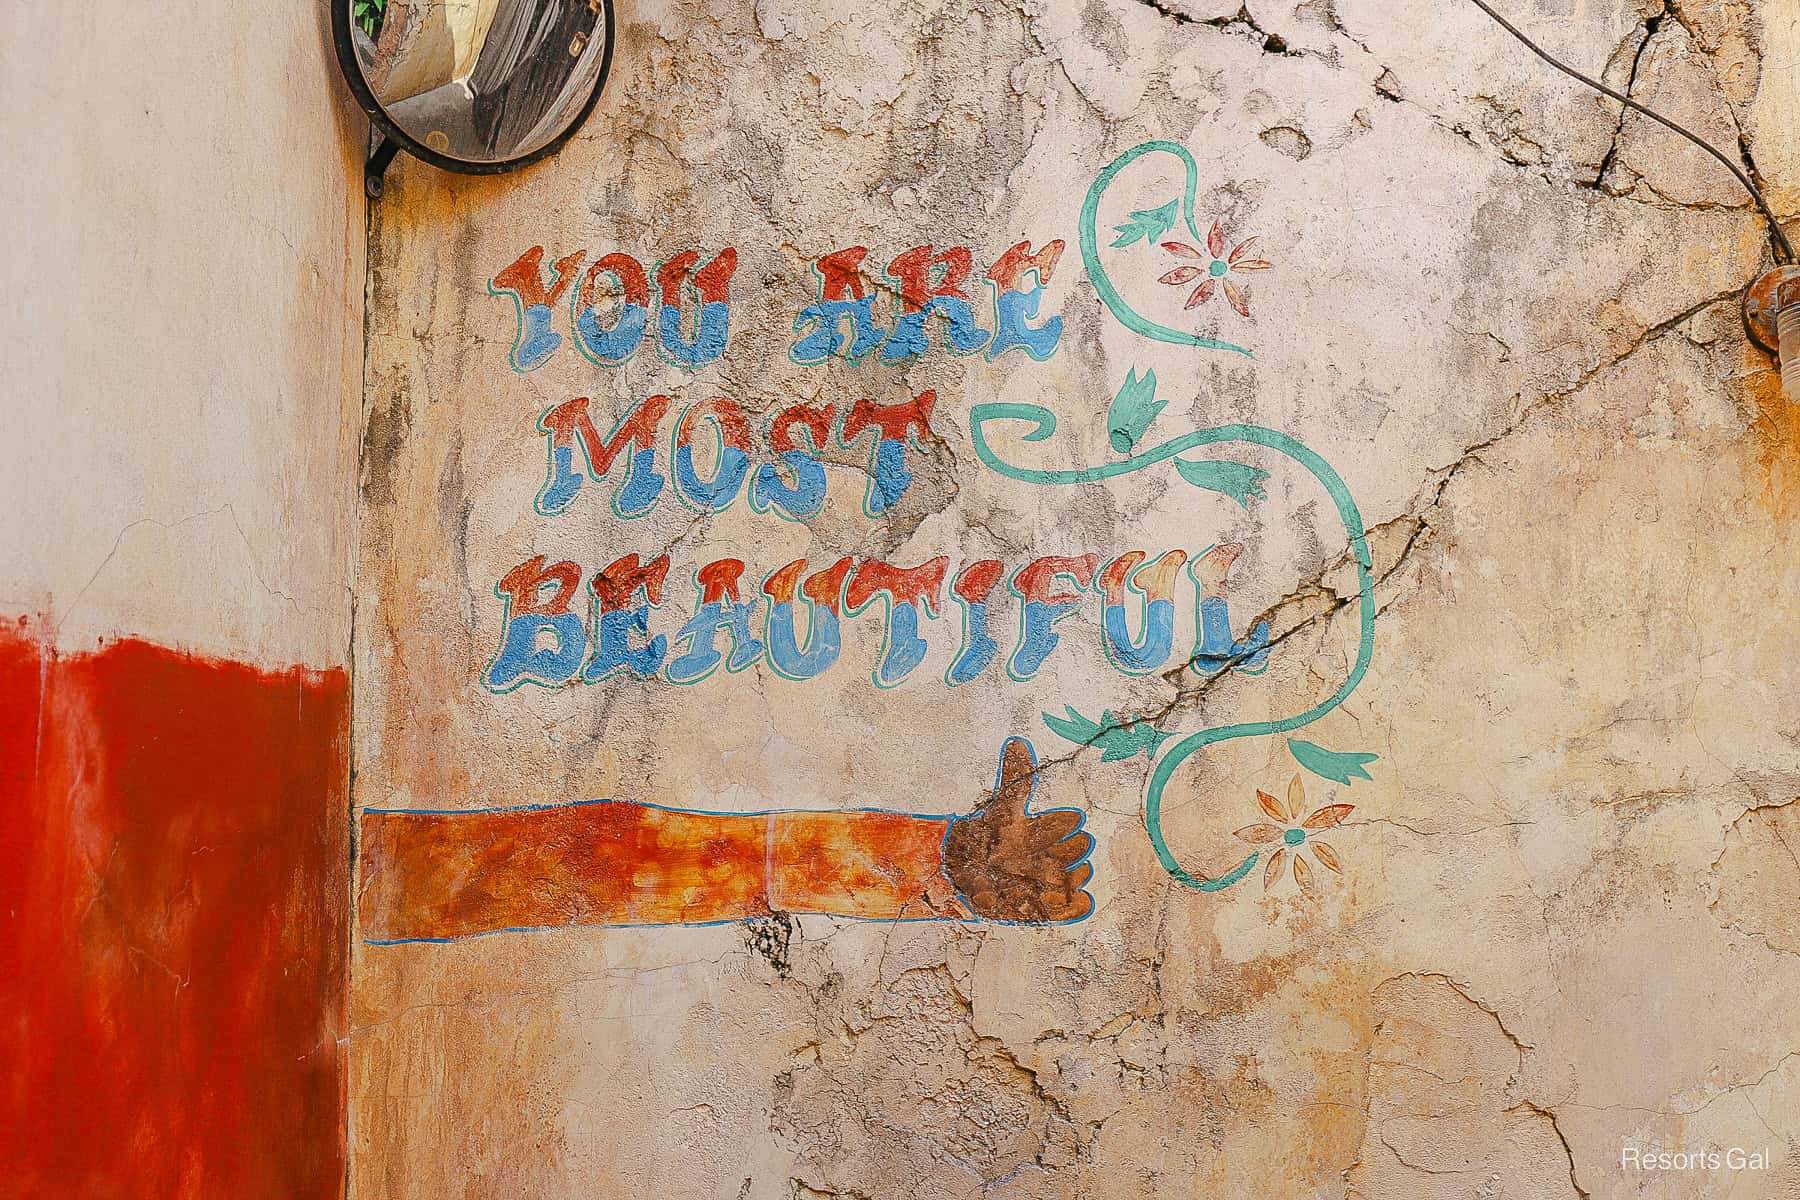 the "You are Most Beautiful" mural at Animal Kingdom 